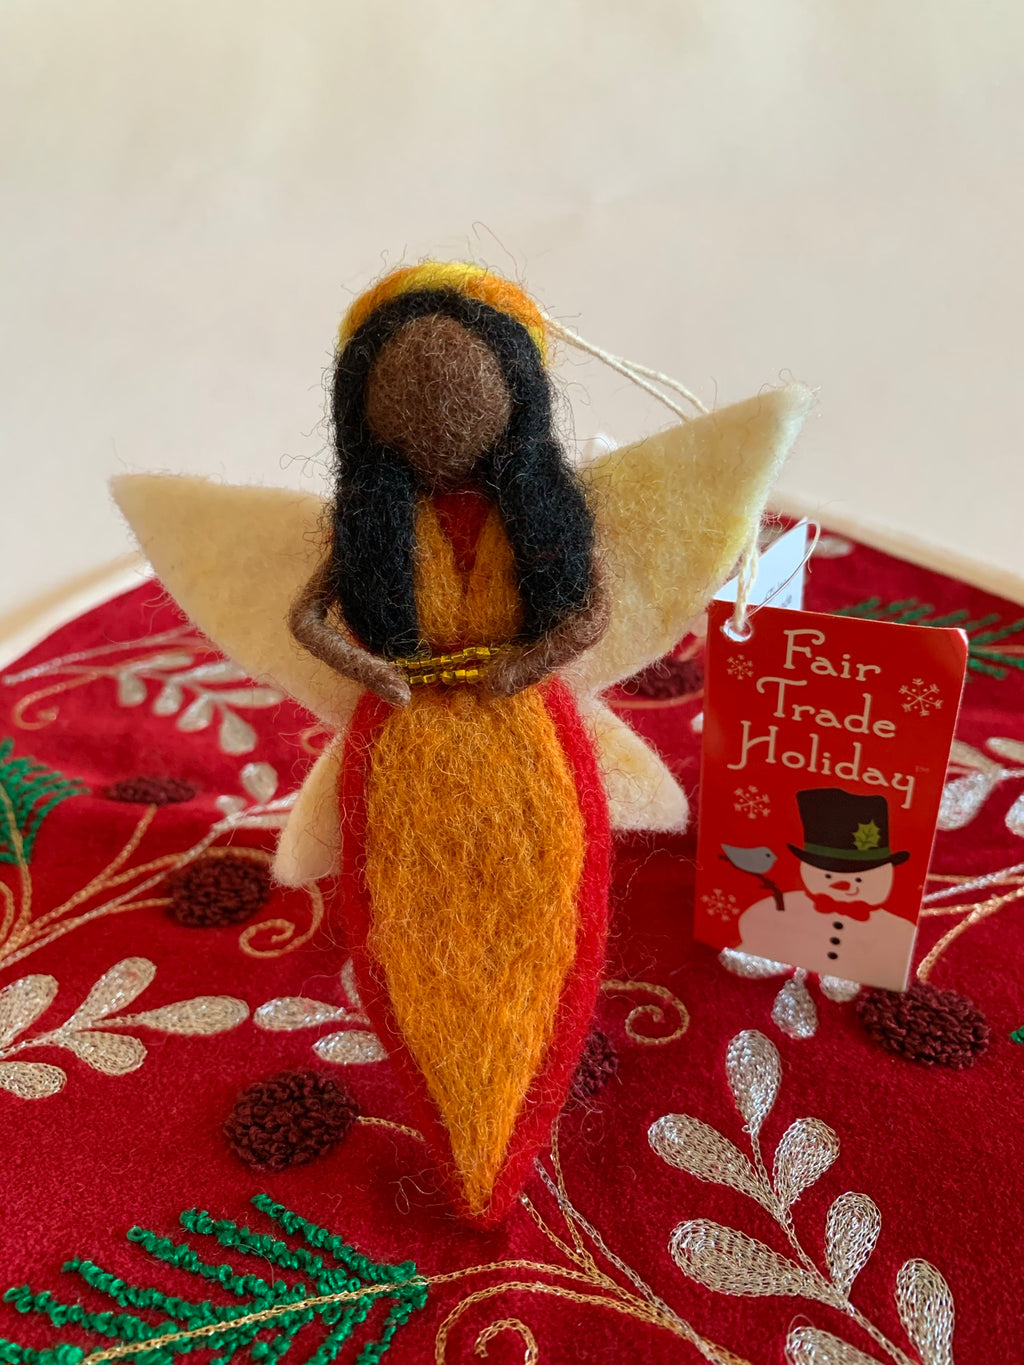 This fire-fairy Christmas ornament is handmade (fair trade) from 100% wool. She is black-skinned & wearing an orange dress with red on the edge & has a double row of tiny gold beads around the empire waist. She wears a yellow & orange headpiece, has black hair and white wings with a bit of light yellow on them. She has bendable arms and no facial markings. She is approximately 5"x4" and comes with a fair trade holiday "to/from" tag to use if giving as a gift.